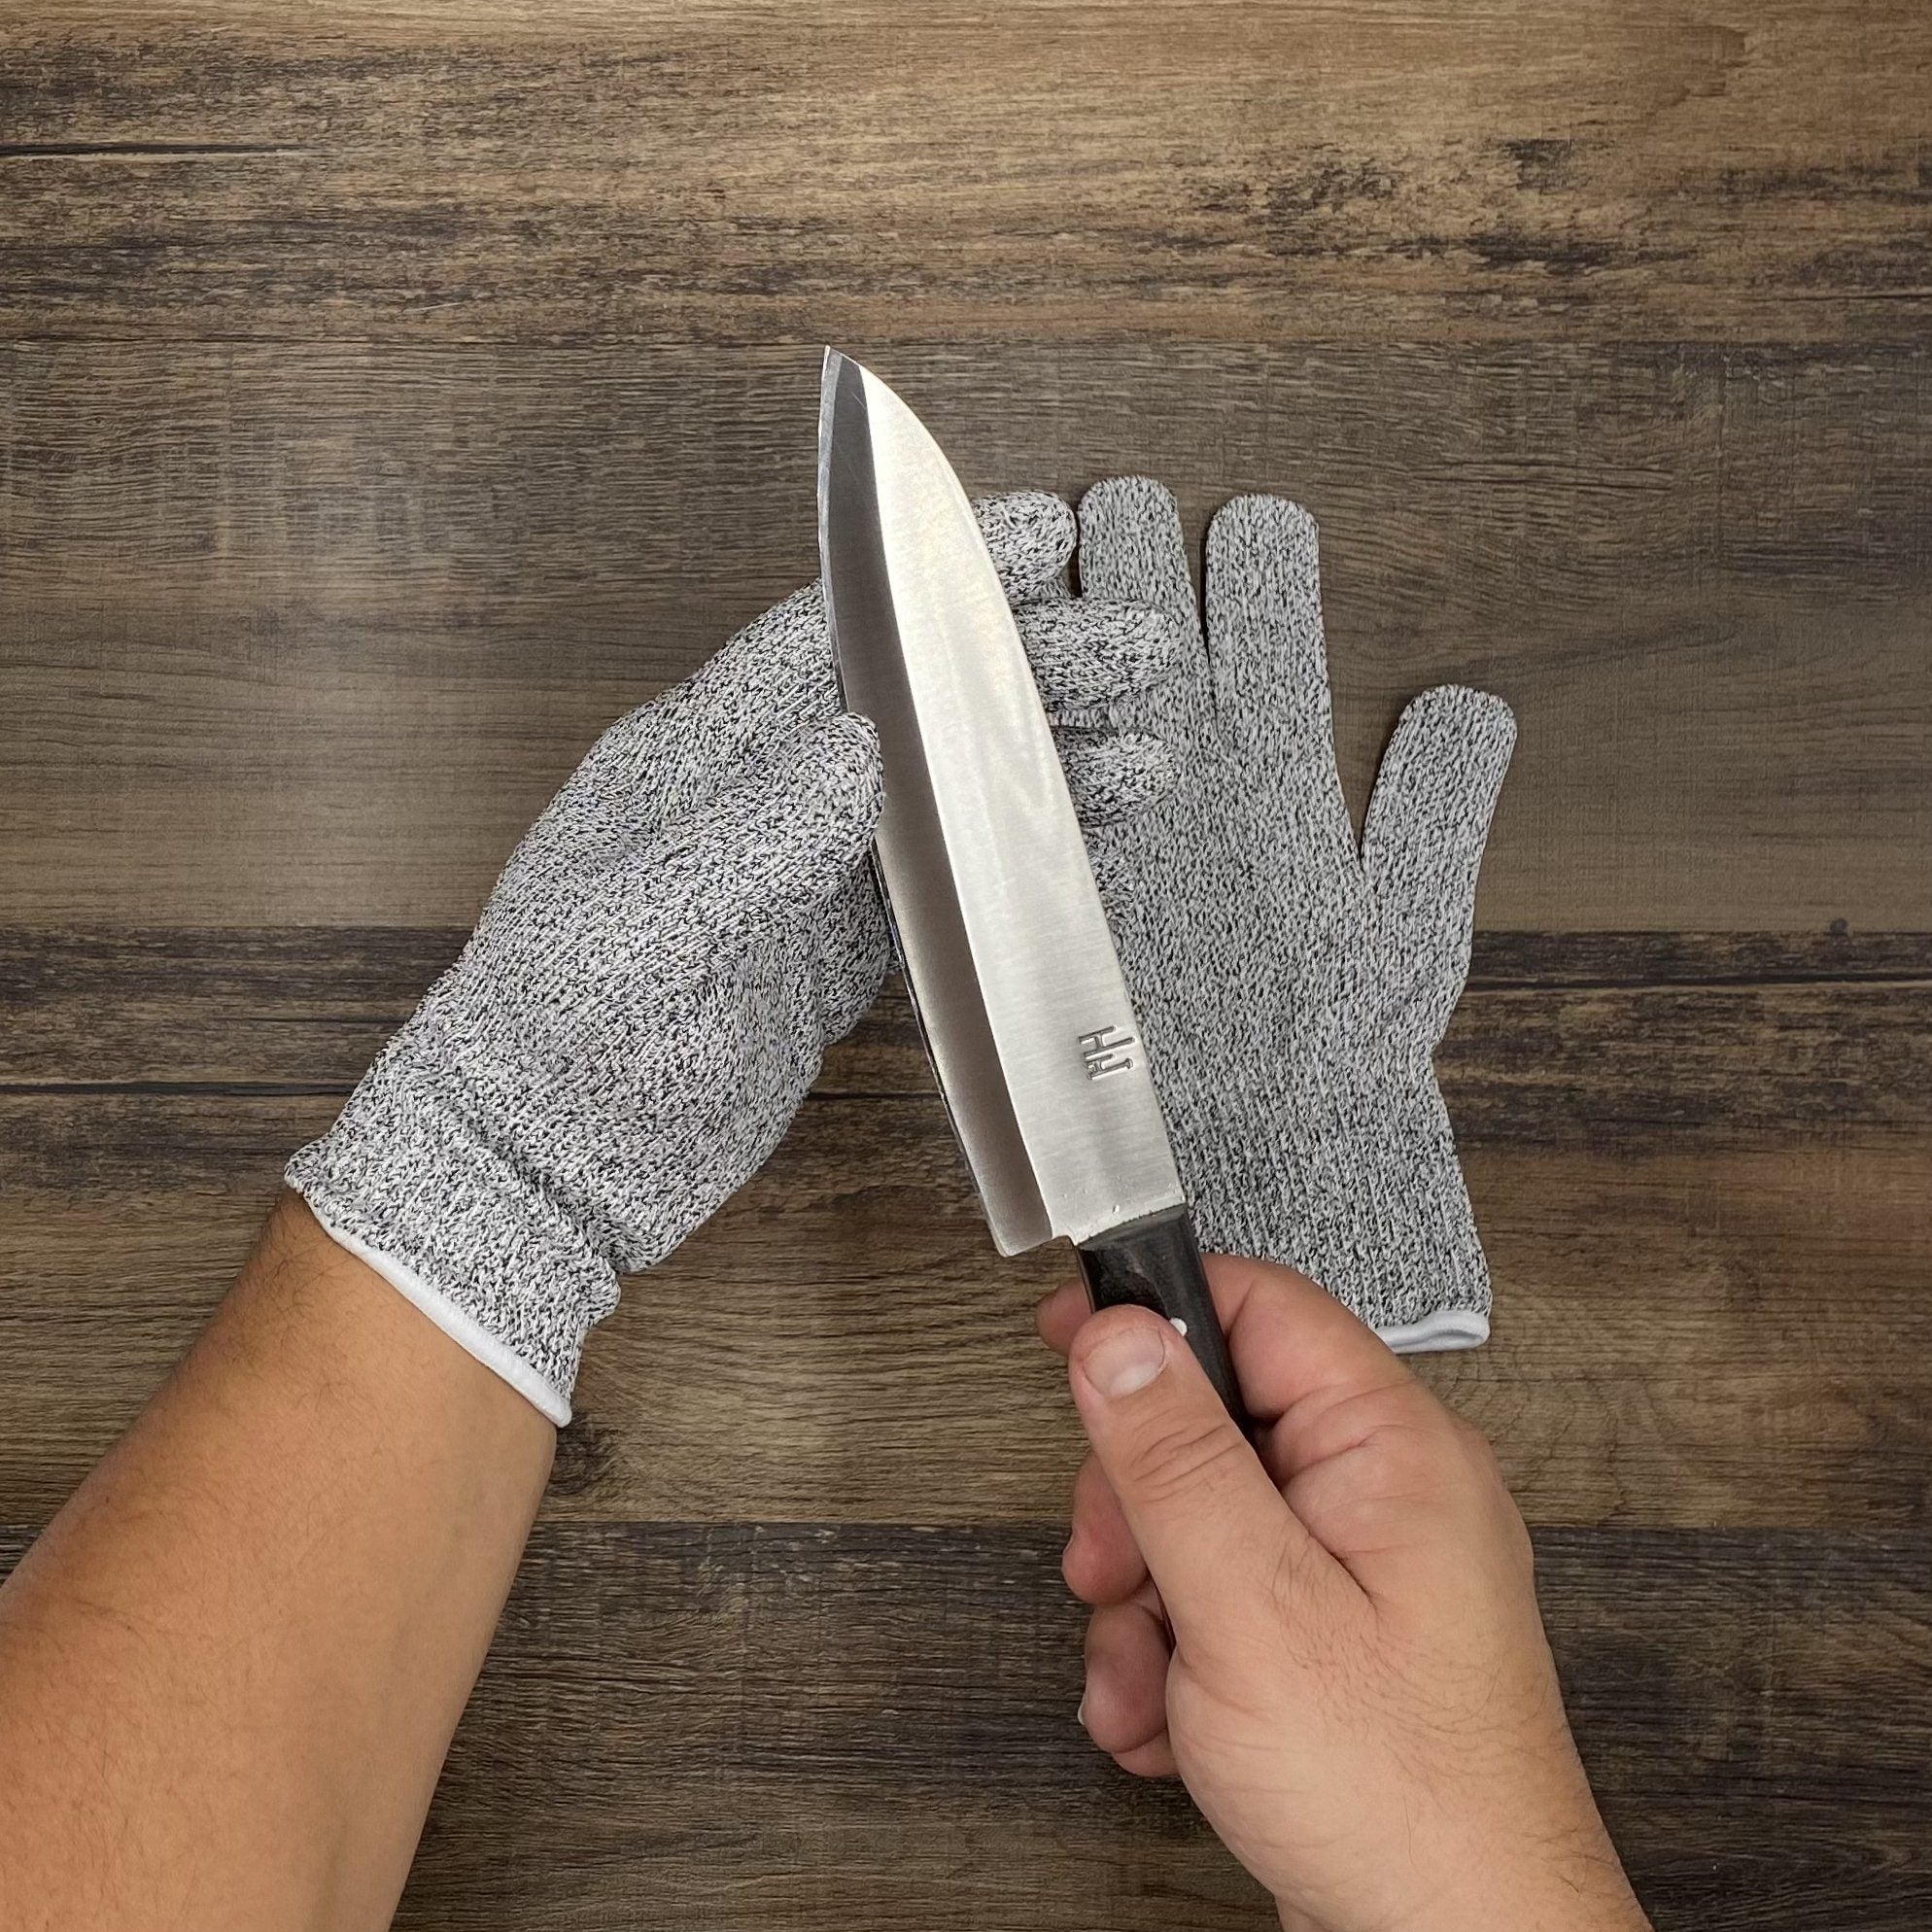 Cut Resistant Gloves & Cutting Ruler - Cutlery & Cutting Boards - Family &  Consumer Sciences